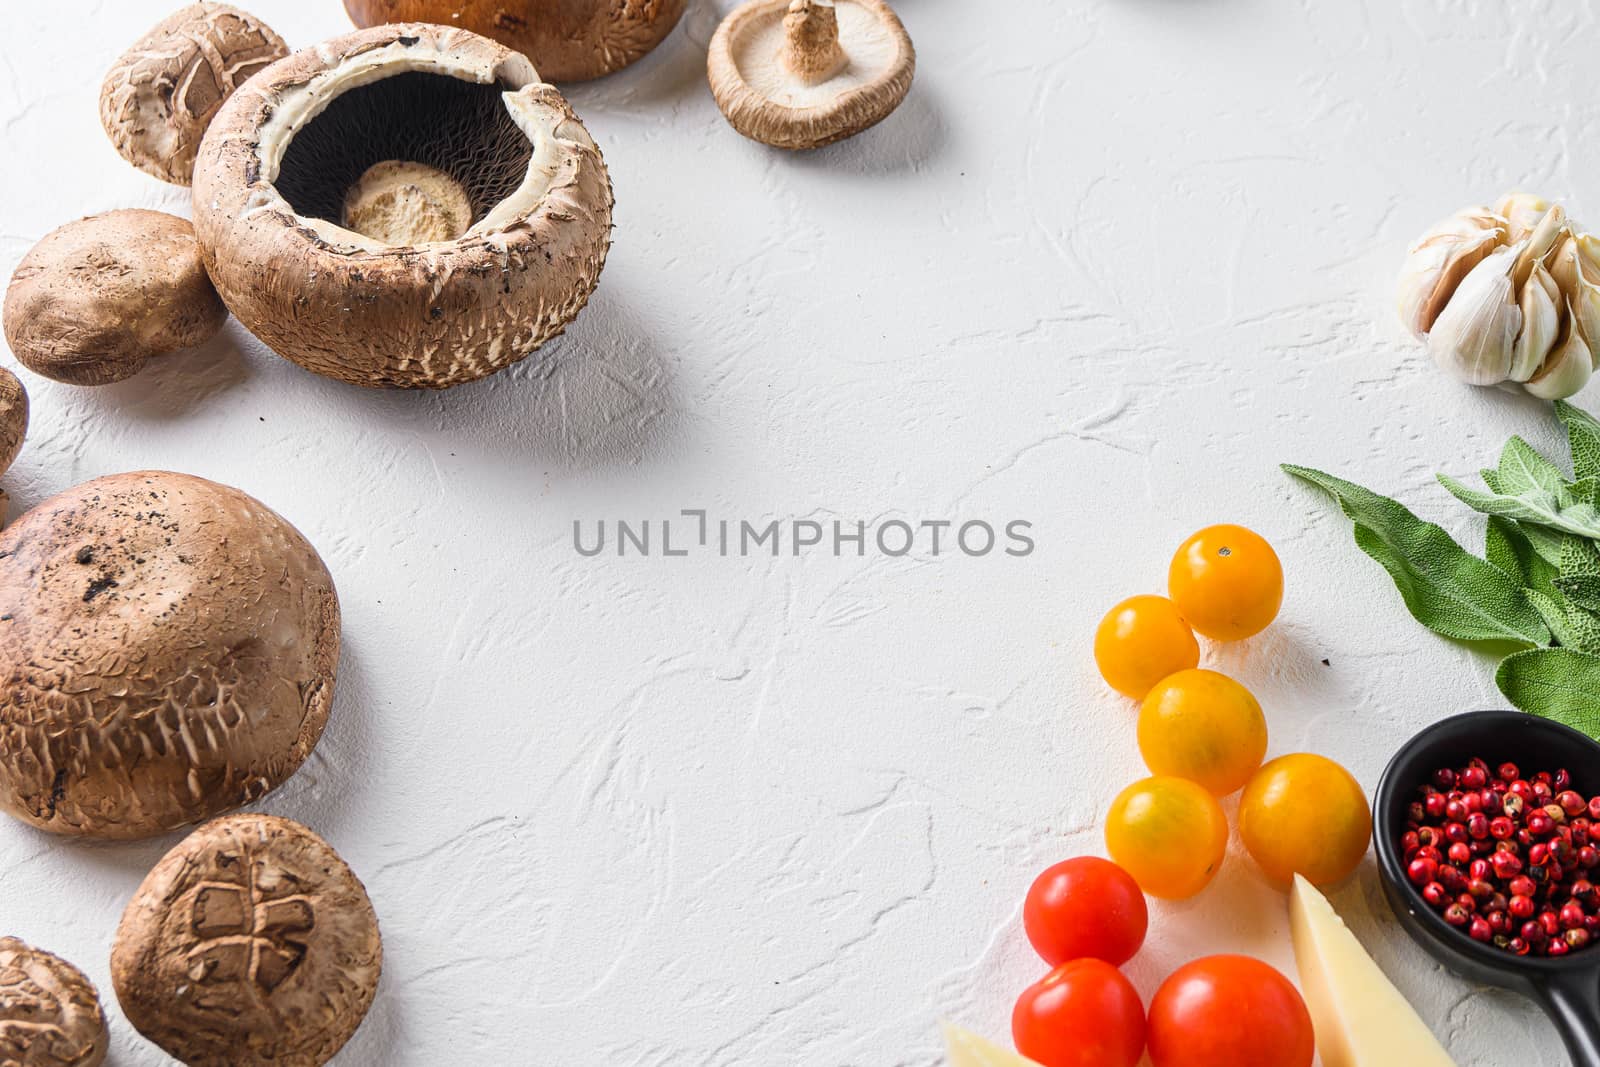 Mushrooms ingredients for baking portobello, cheddar cheese, cherry tomatoes and sage on white background side view concept framed space for text. by Ilianesolenyi